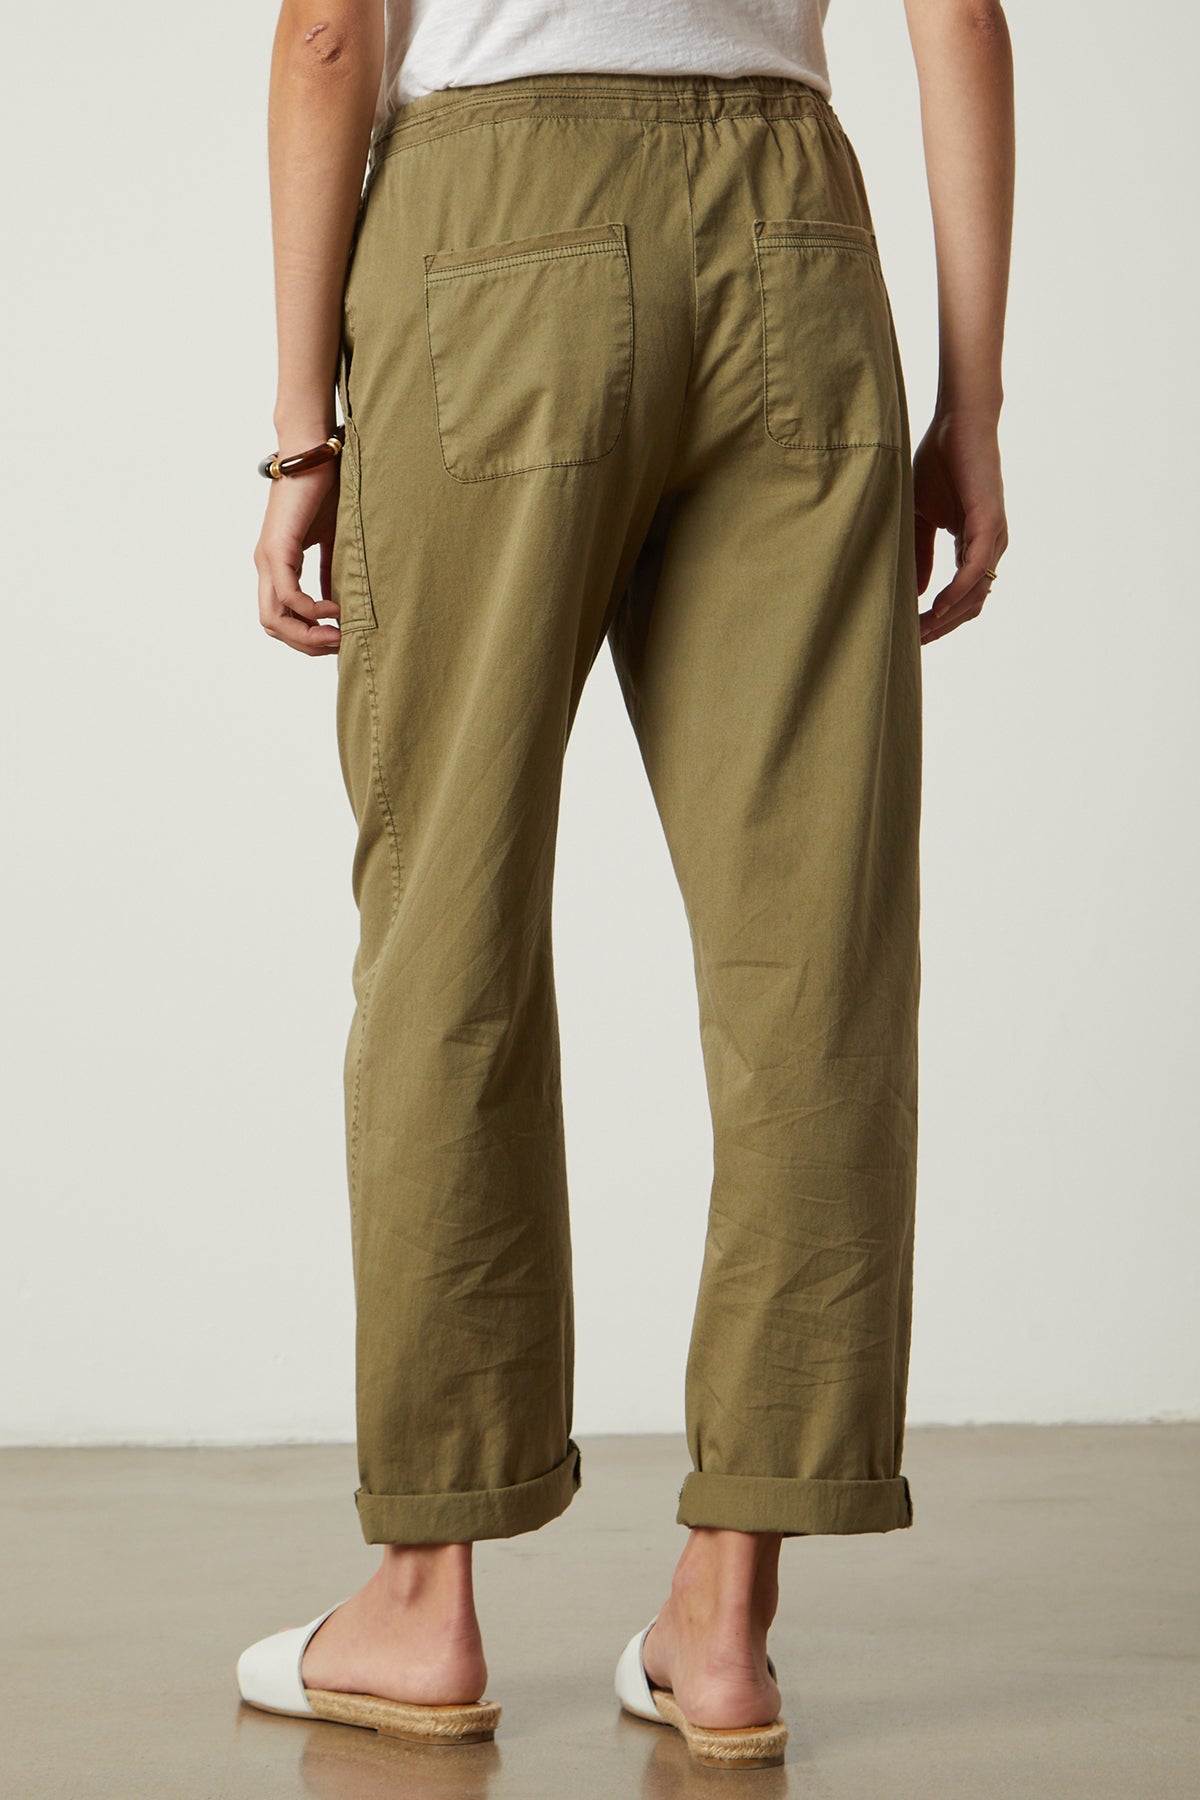 Misty Pant in forest twill back-26496414679233